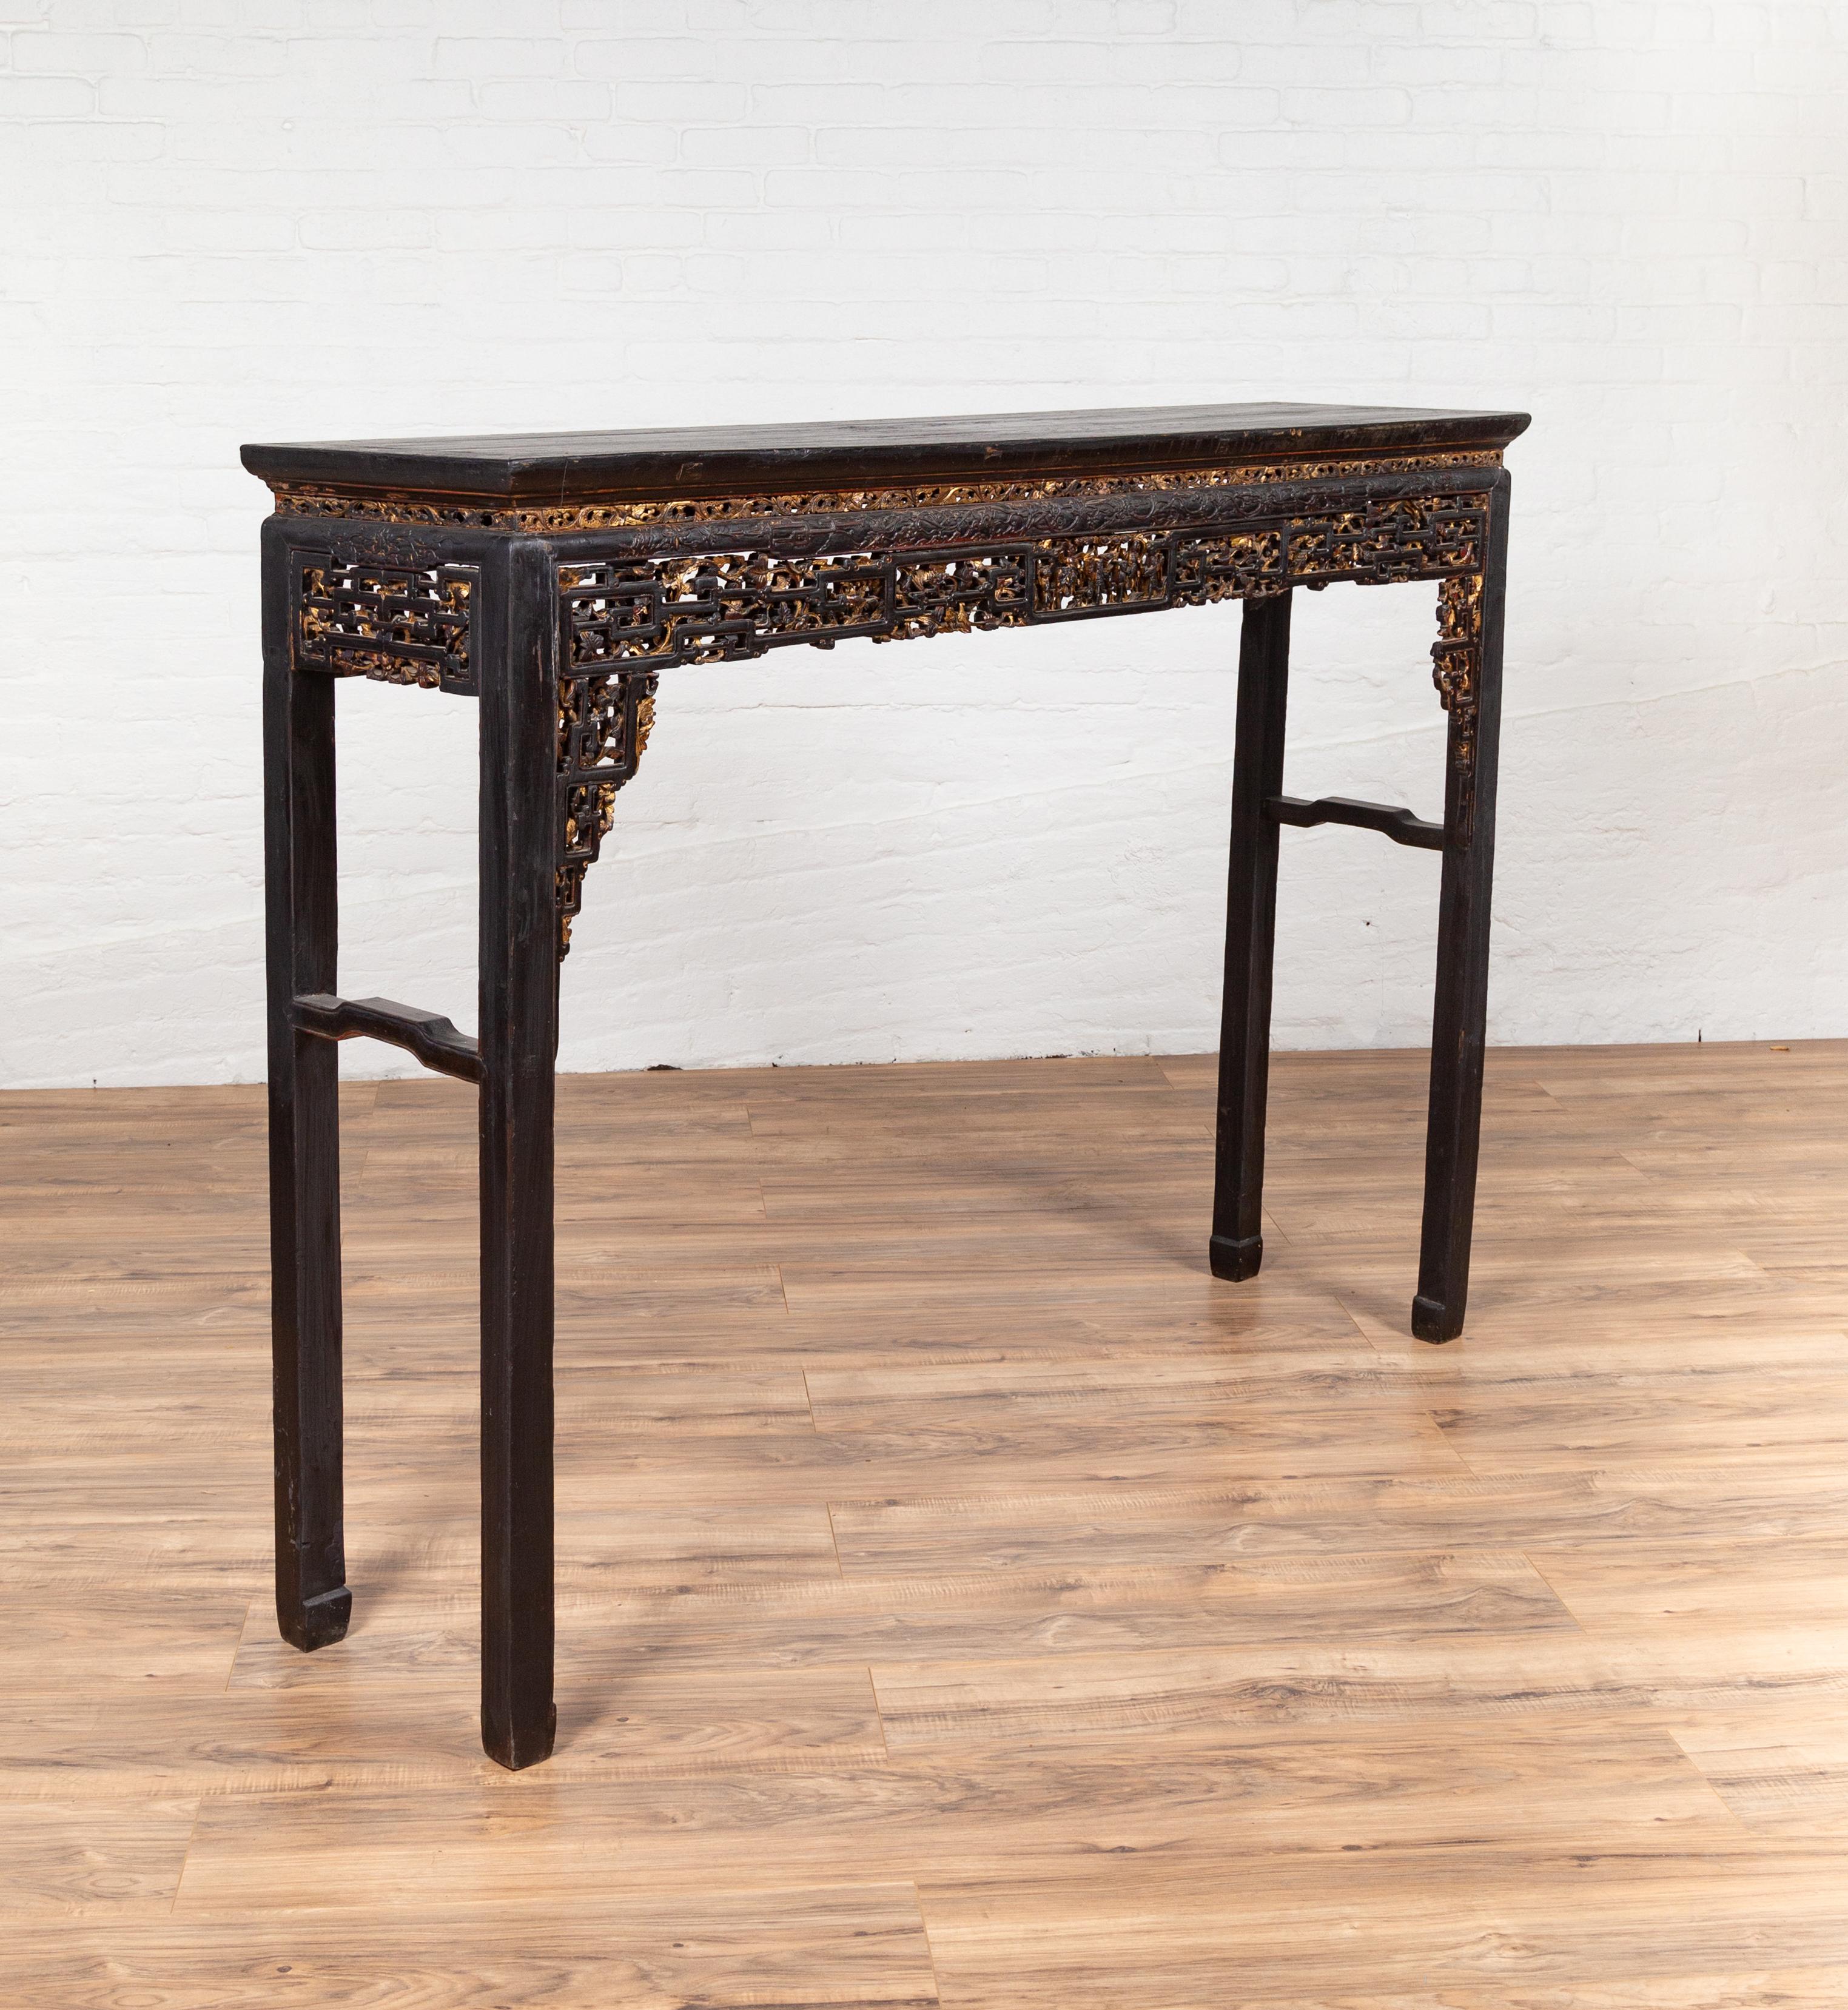 A 19th century Chinese parcel-gilt altar console table with hand carved décor, black patina and unusual size. This Chinese console table features a rectangular top sitting above a thin gilded frieze showcasing a delicate scrollwork. The apron